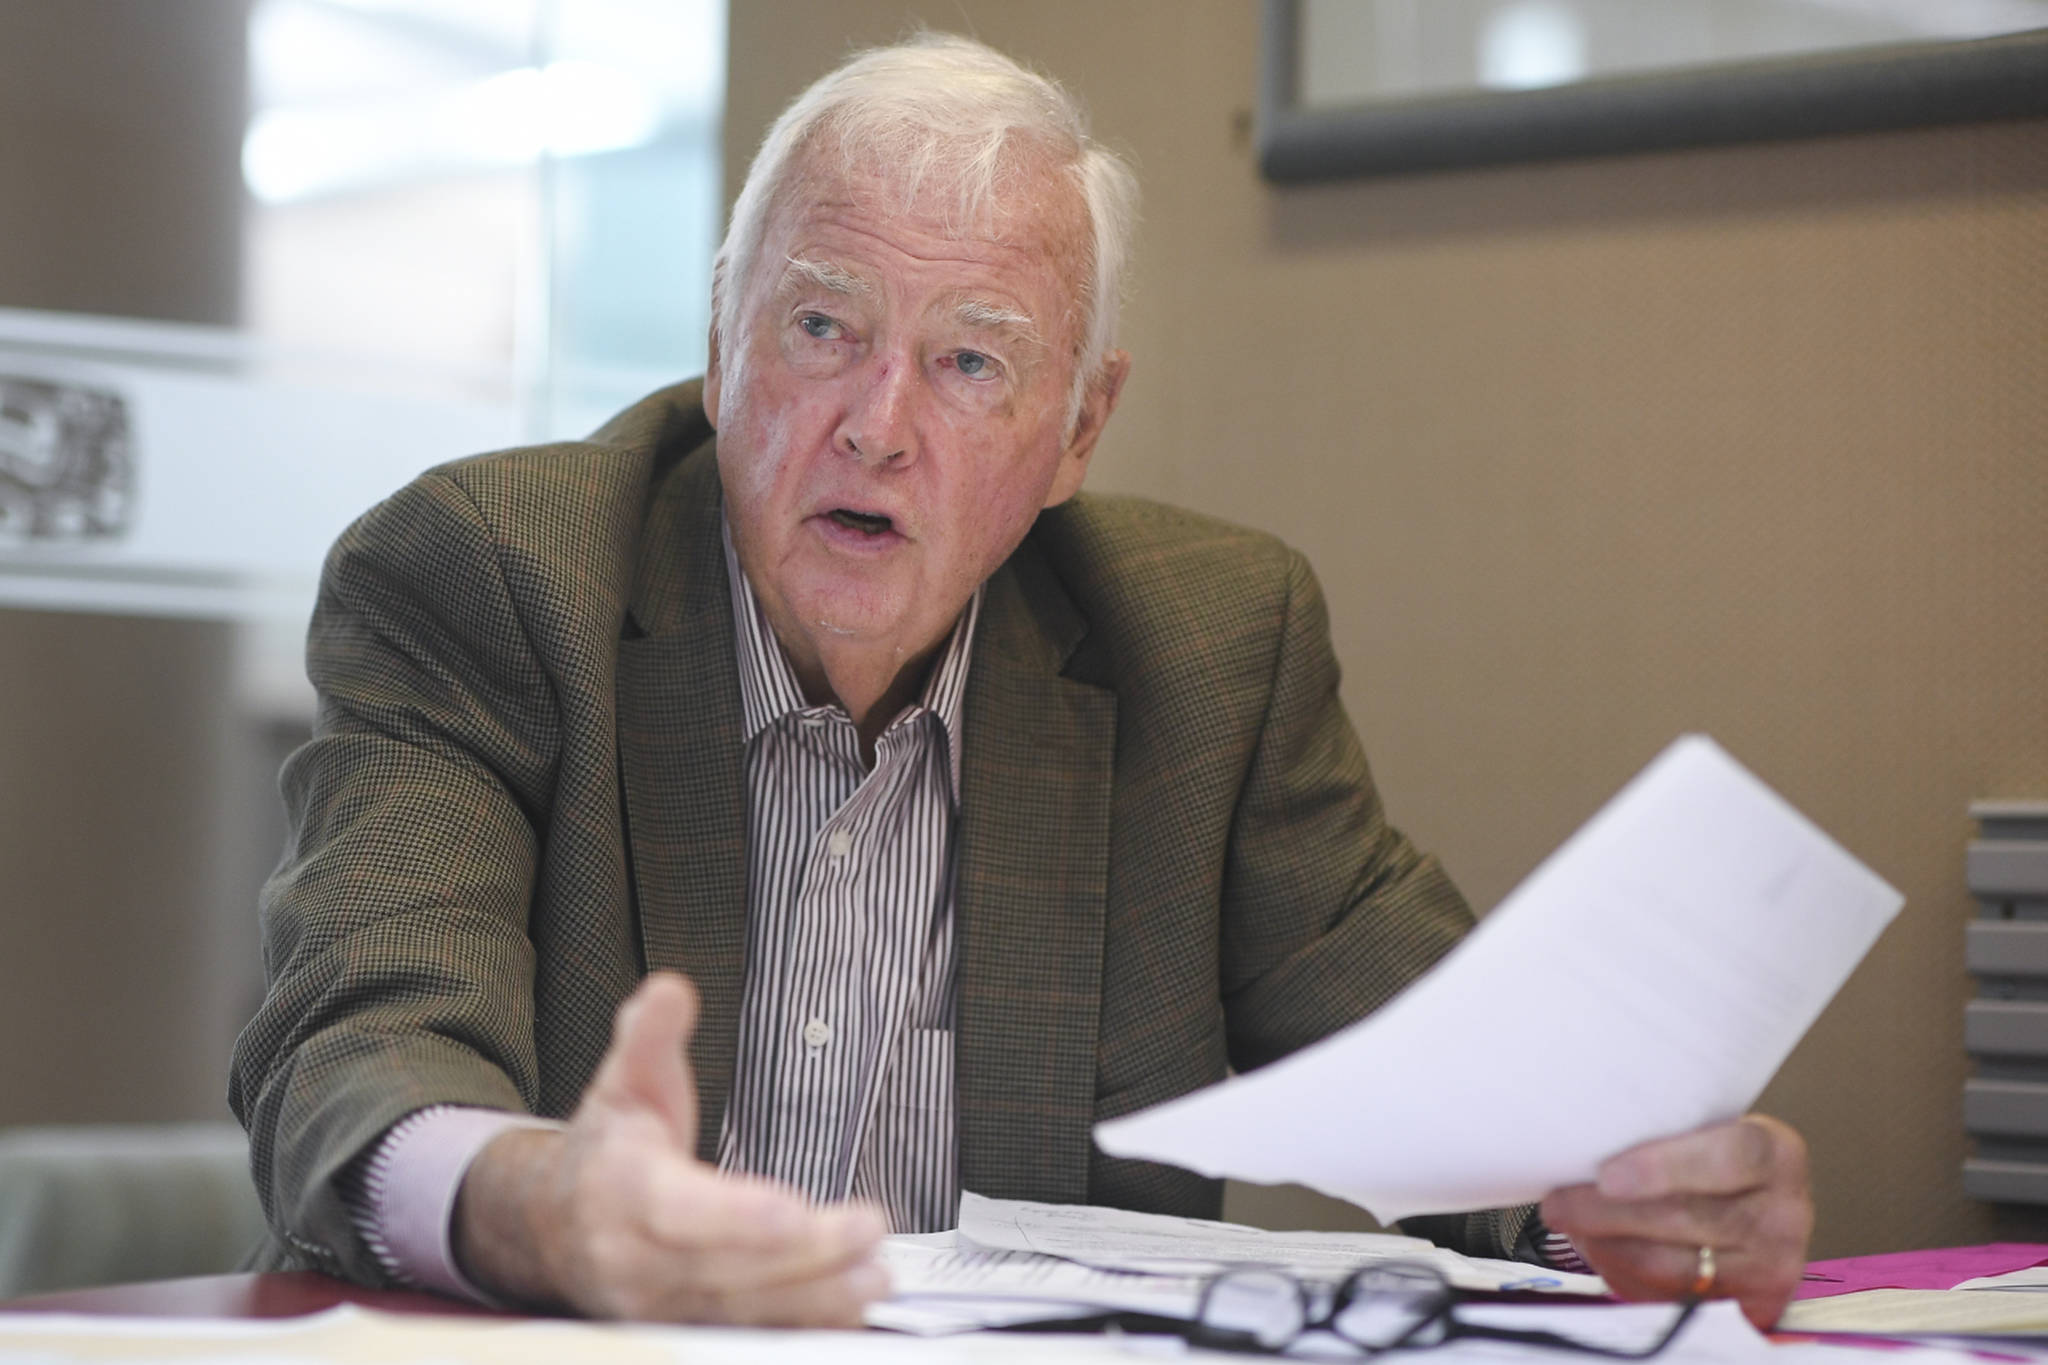 Former Gov. Frank Murkowski speaks on a range of subjects during an interview with the Juneau Empire on Thursday, May 9, 2019. (Michael Penn | Juneau Empire)